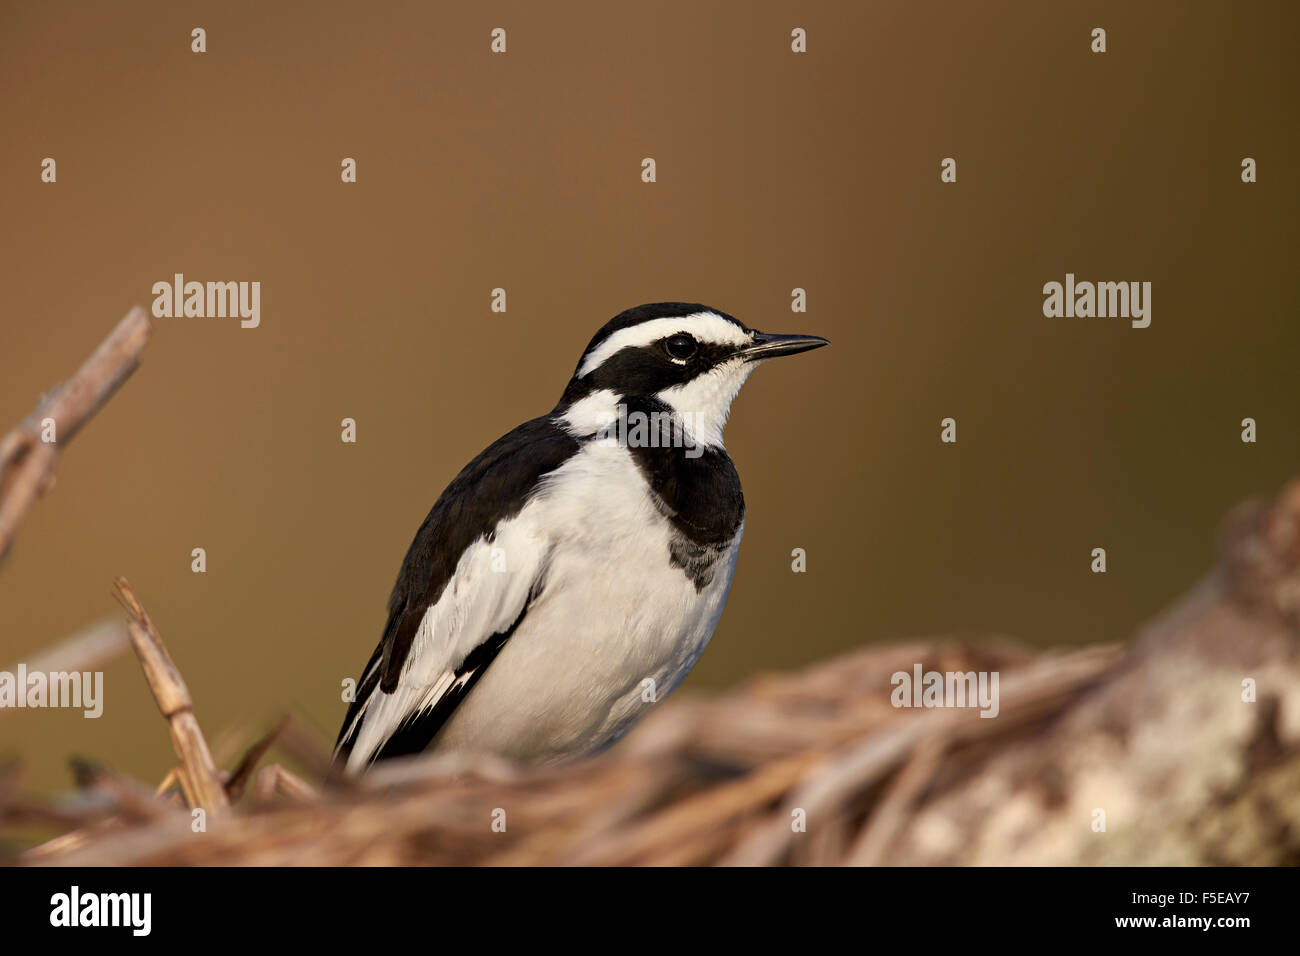 African pied wagtail (Motacilla aguimp), Kruger National Park, South Africa, Africa Stock Photo